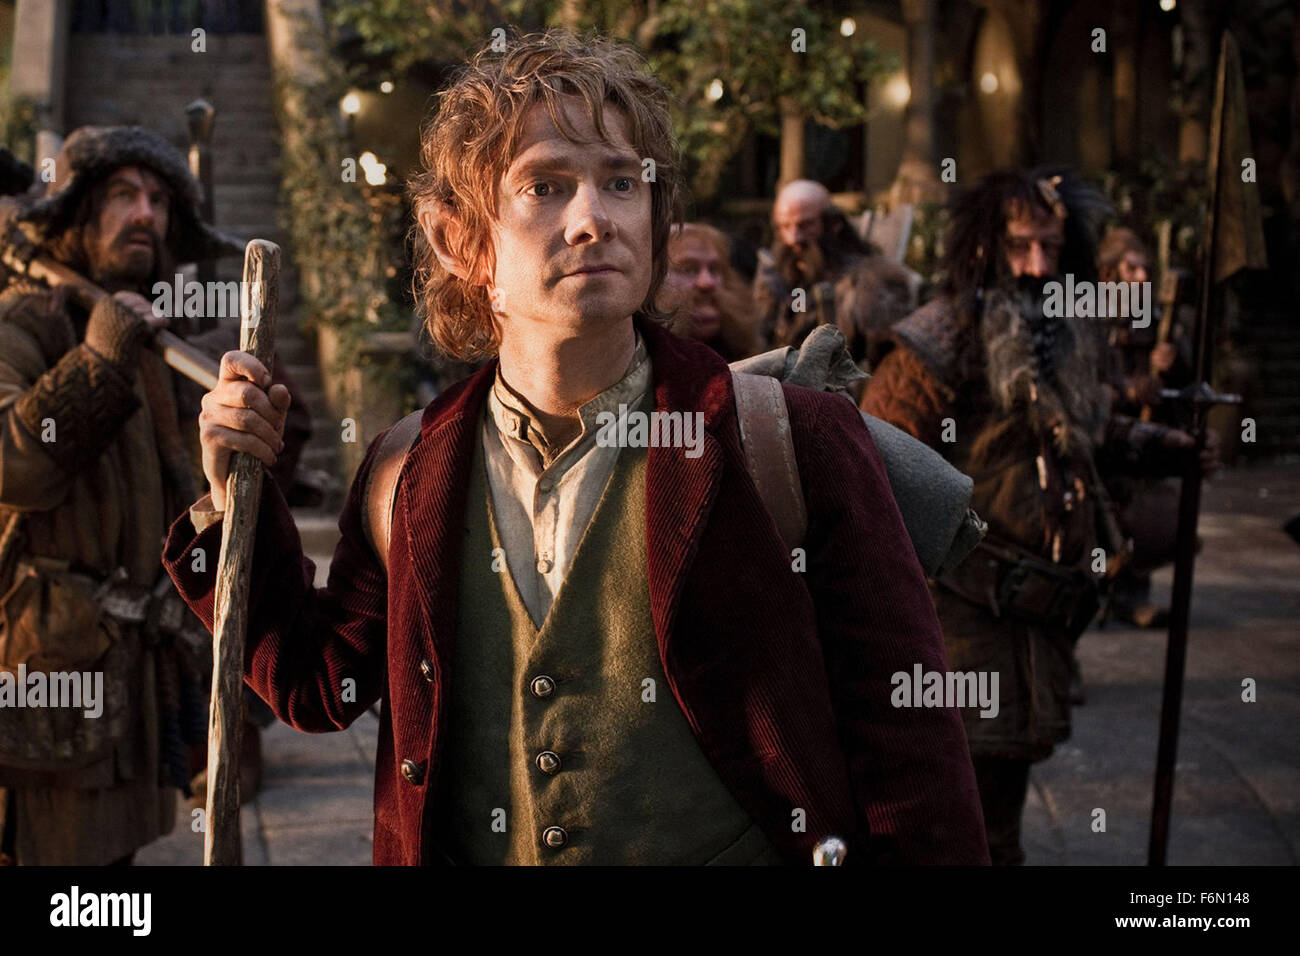 RELEASE DATE: December 14, 2012 TITLE: The Hobbit: An Unexpected Journey STUDIO: MGM DIRECTOR: Peter Jackson PLOT: A curious Hobbit, Bilbo Baggins, journeys to the Lonely Mountain with a vigorous group of Dwarves to reclaim a treasure stolen from them by the dragon Smaug. PICTURED: MARTIN FREEMAN as Bilbo Baggins (Credit: c Walt Disney Pictures/Entertainment Pictures) Stock Photo